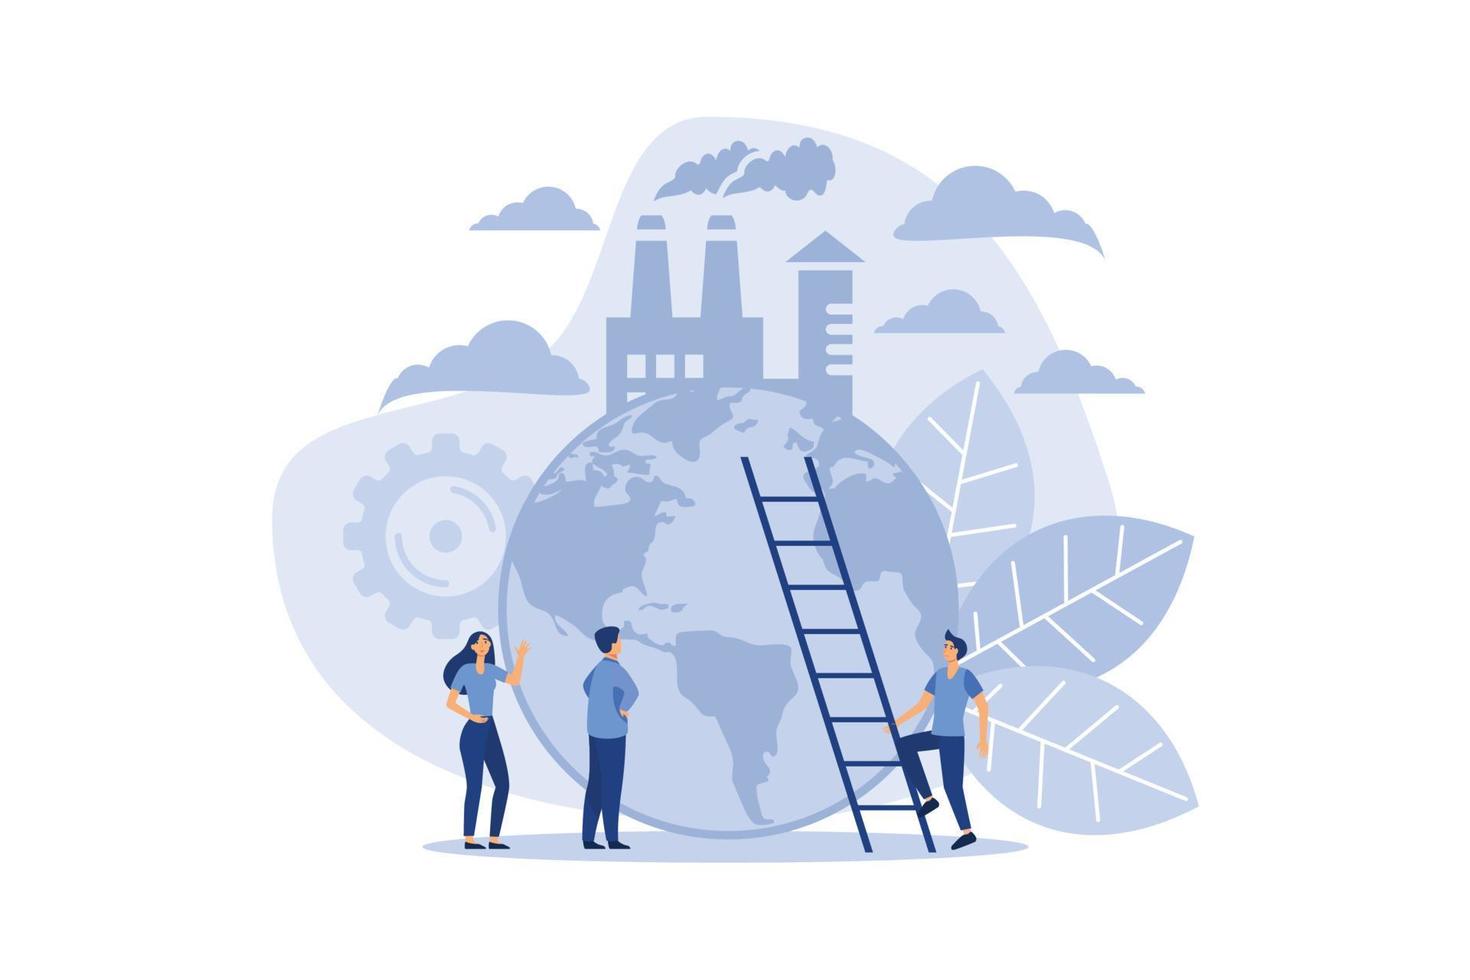 pollution of the planet, emission of harmful substances into the environment, working factories, the concept of Earth Day. flat design modern illustration vector